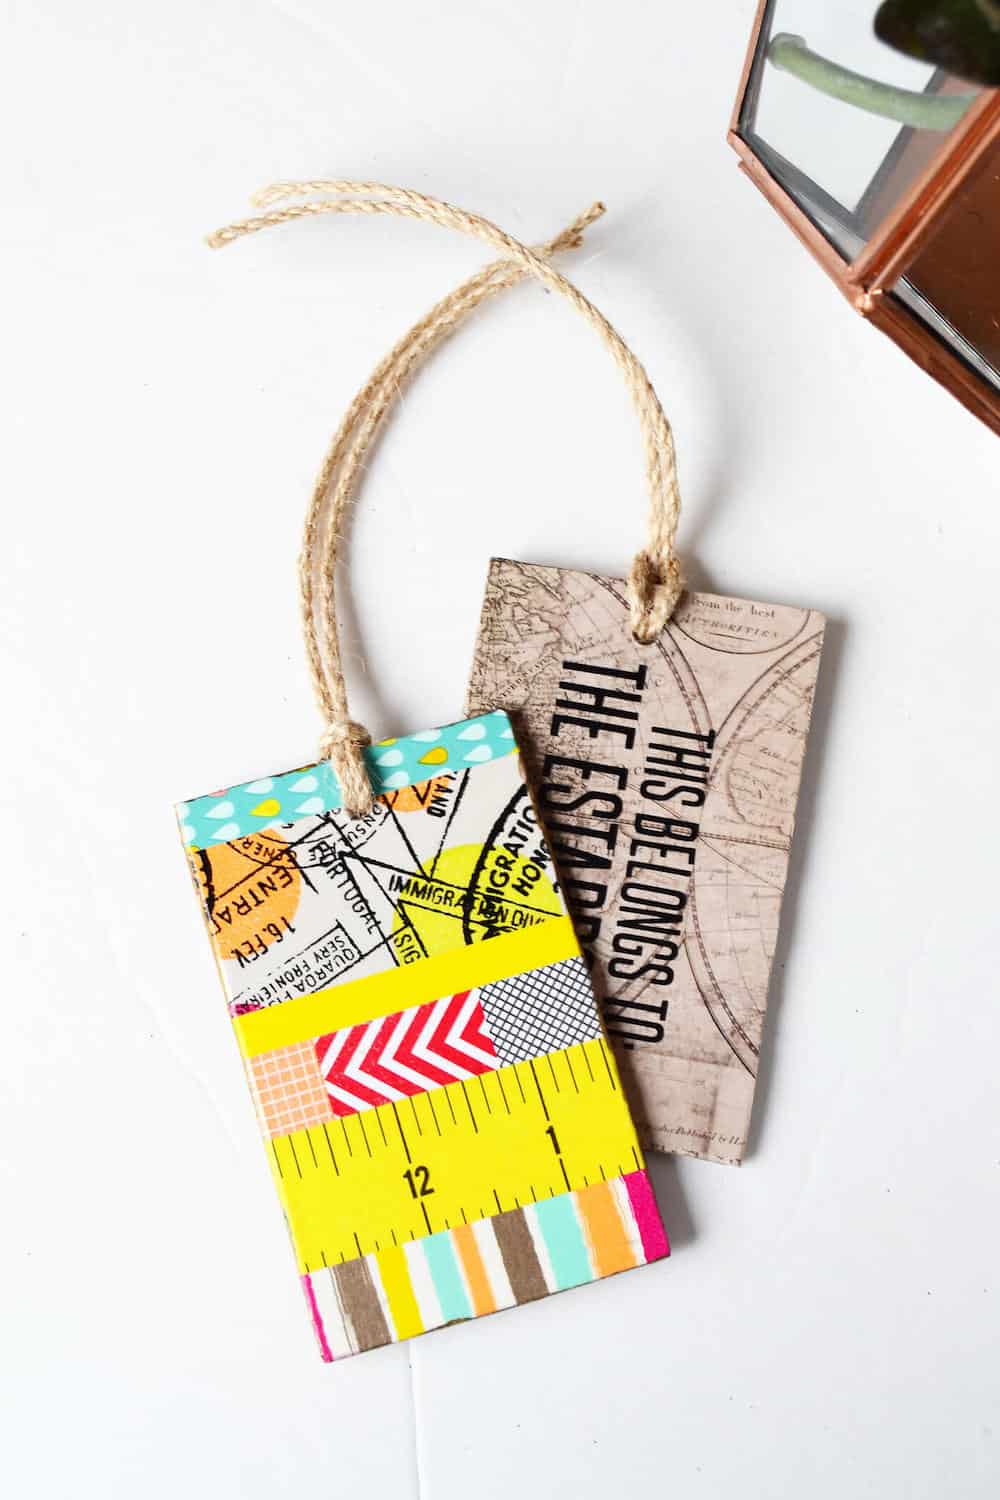 Make these cute, DIY luggage tags out of MDF wood - so easy with no special tools! Customize them any way you like with Mod Podge.